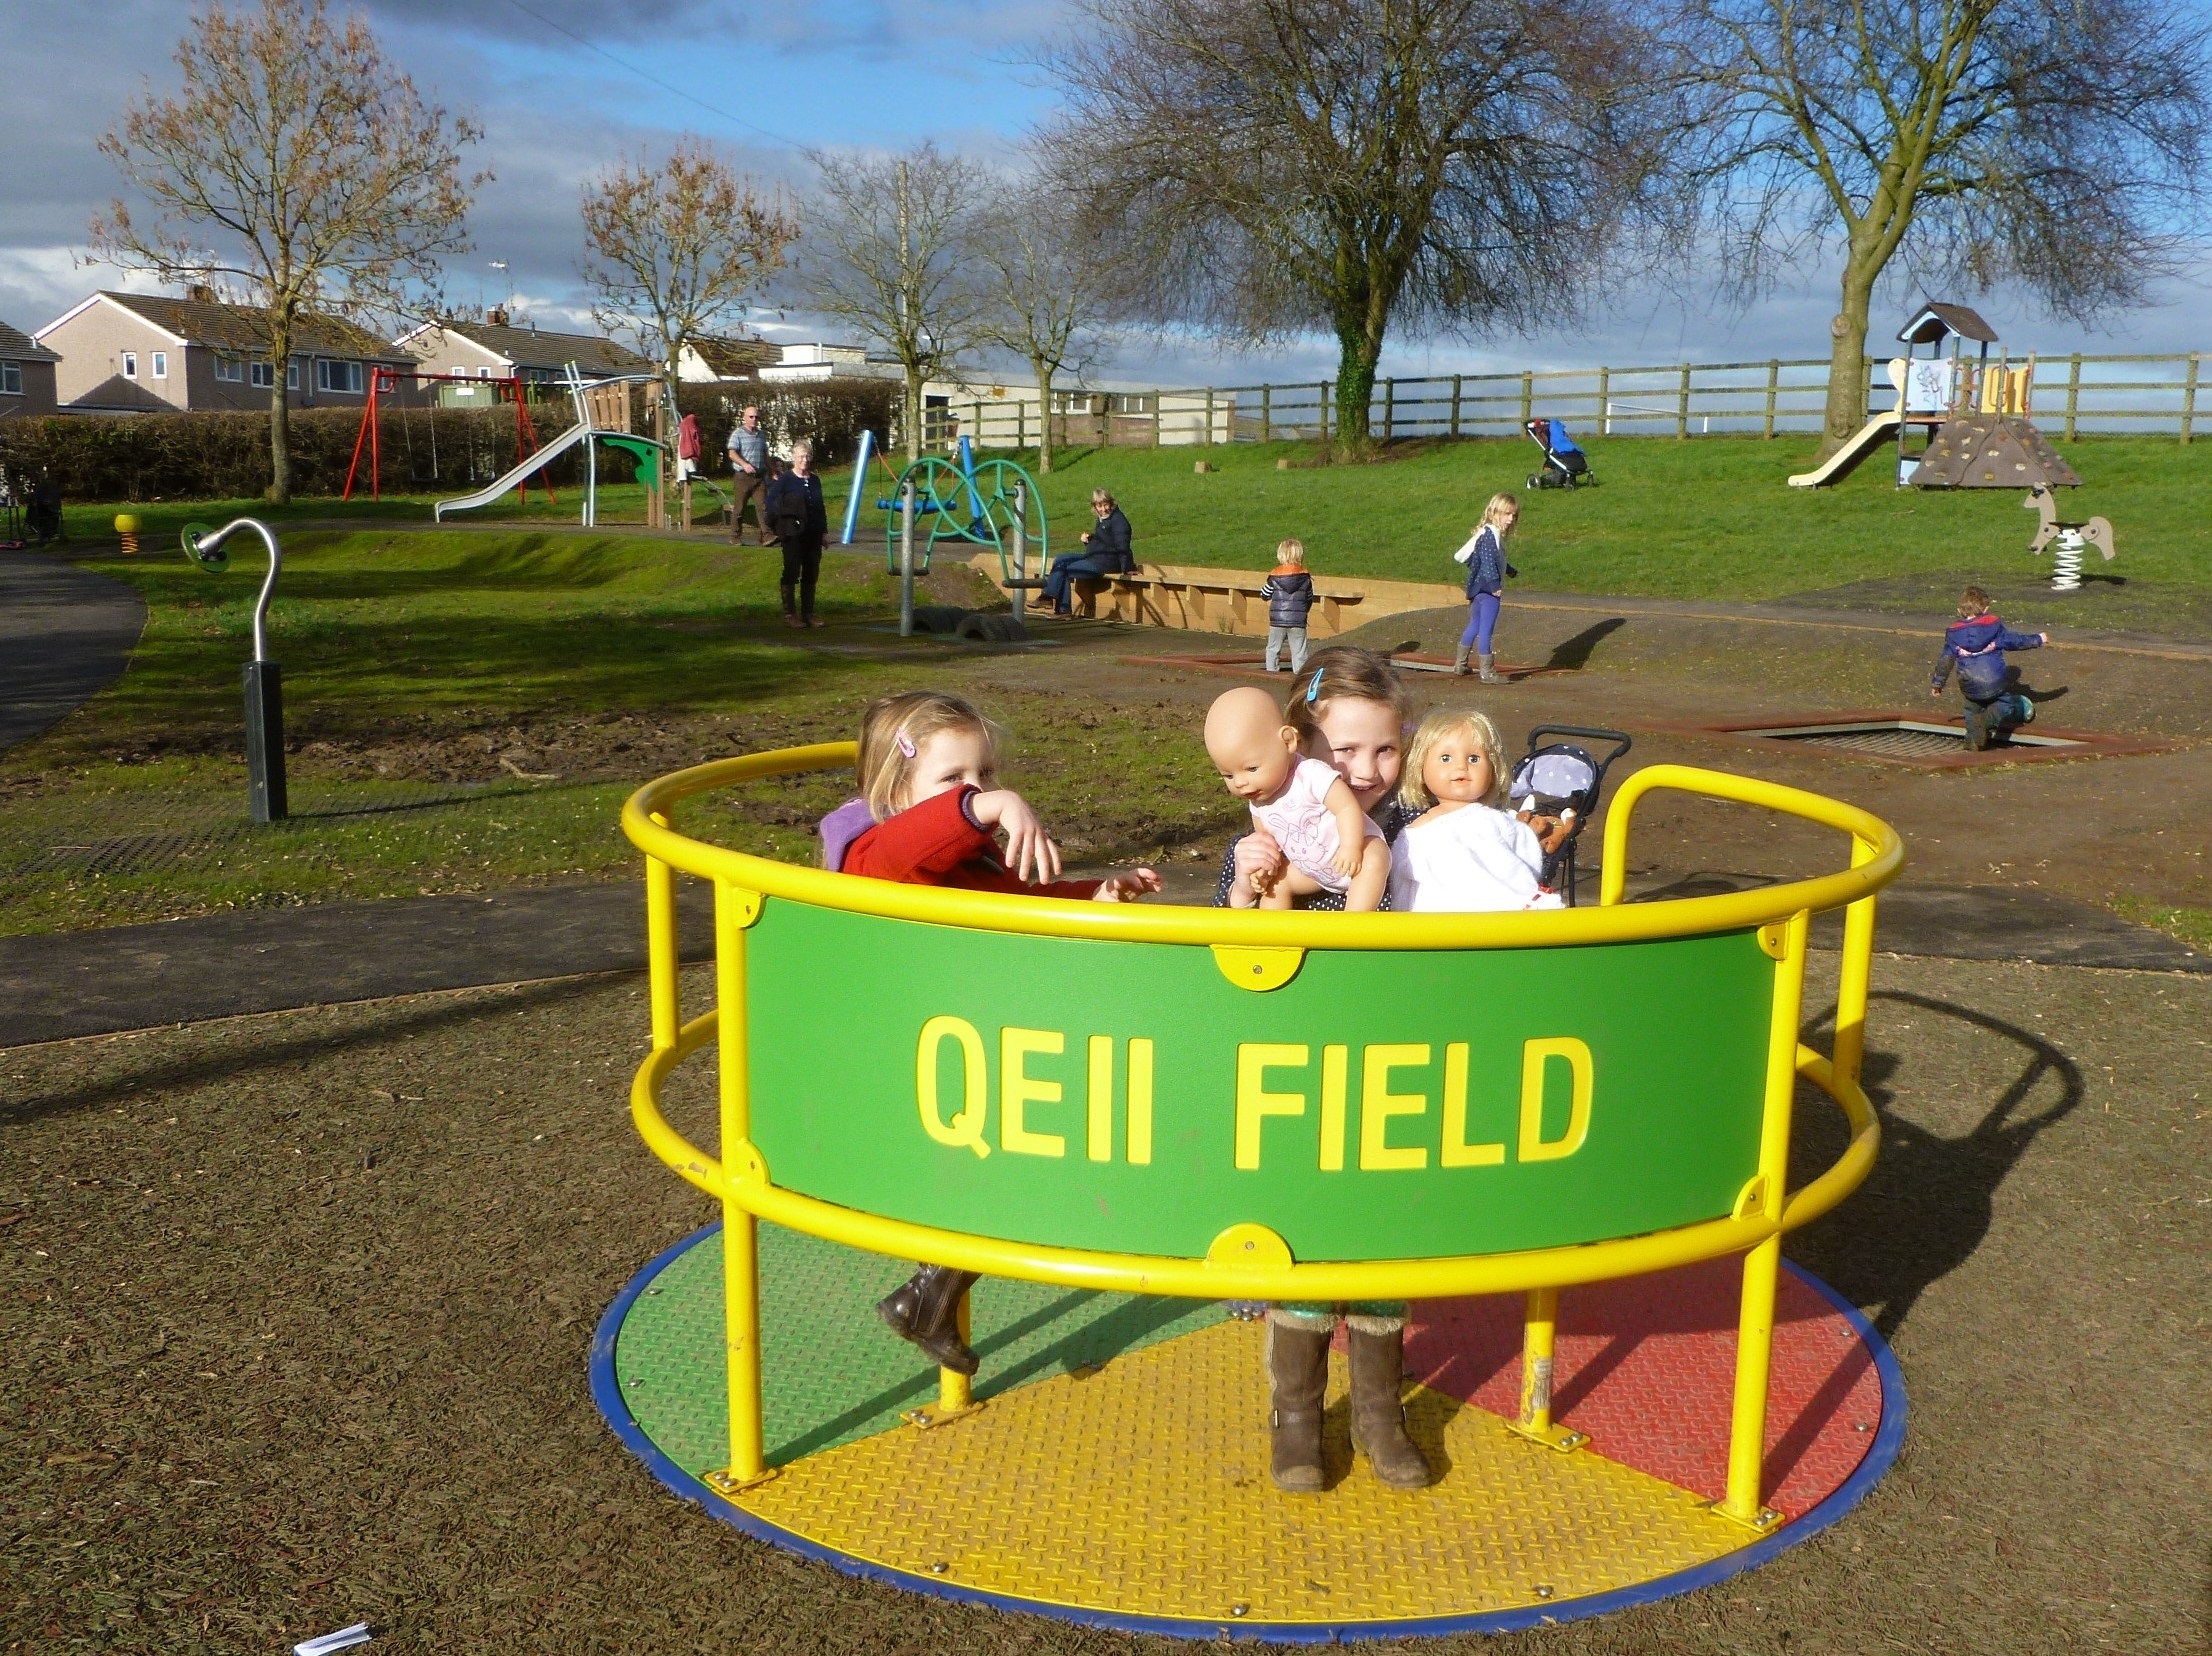 Children enjoying the Childrens roundabout, named QE 2 Field,  in the play area in King George the fifth park